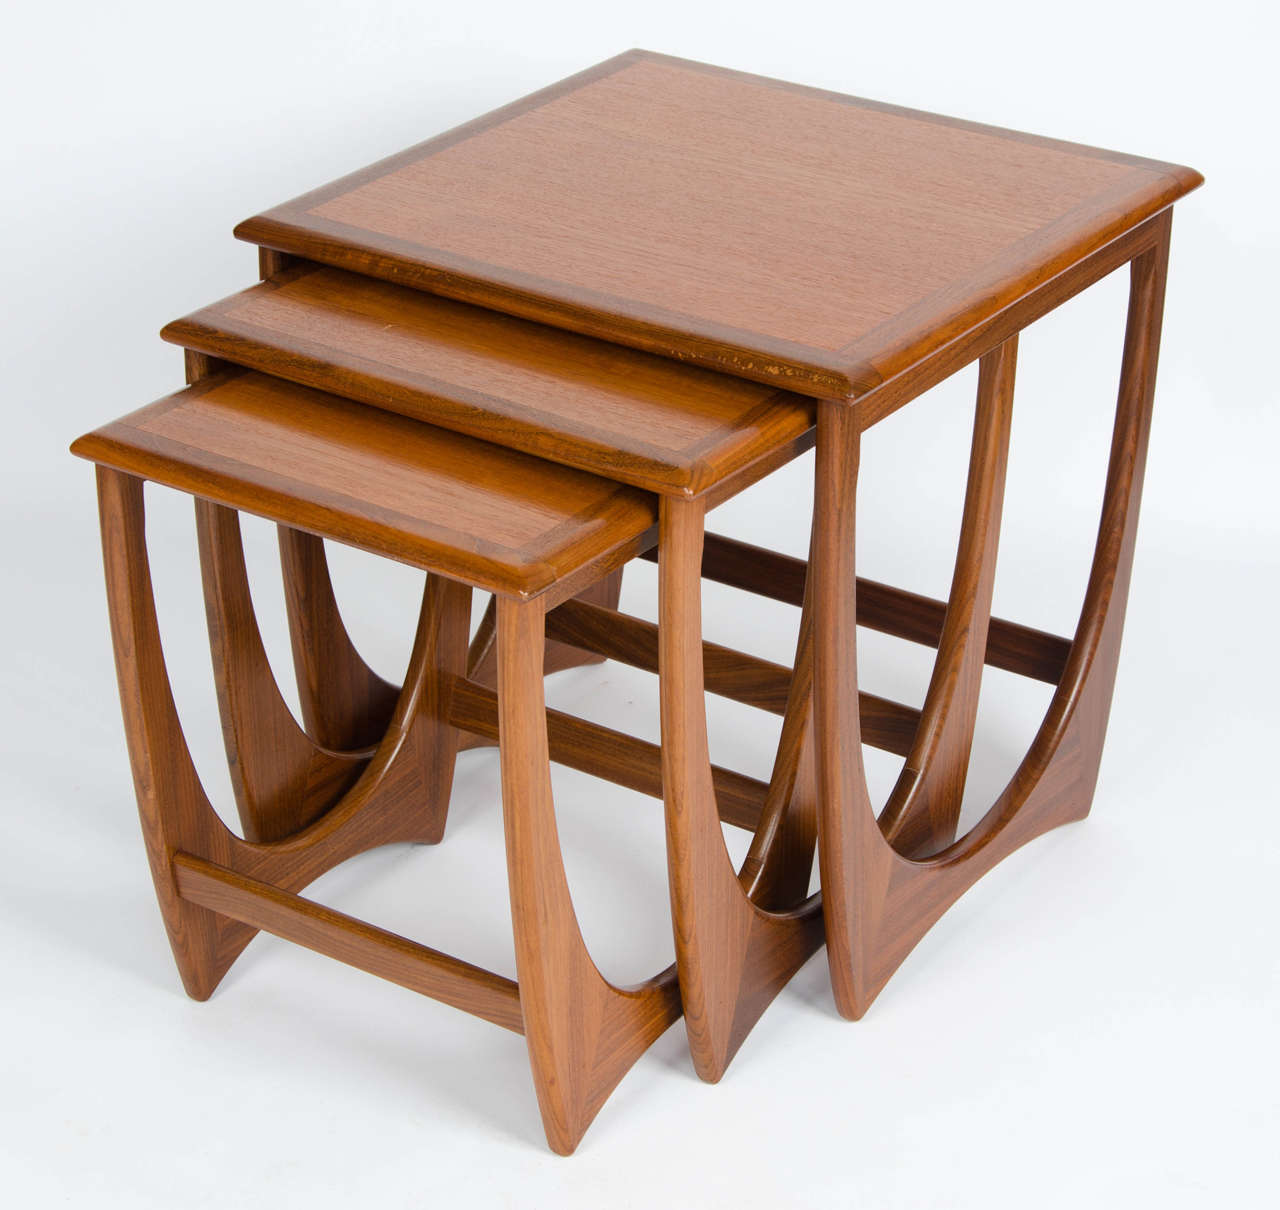 A very nest of tables from the British manufacturer E.Gomme. Designed by V. Wilkins as part of the G-Plan range, seeing production in the early 1970's. Classic G-Plan construction in solid teak.